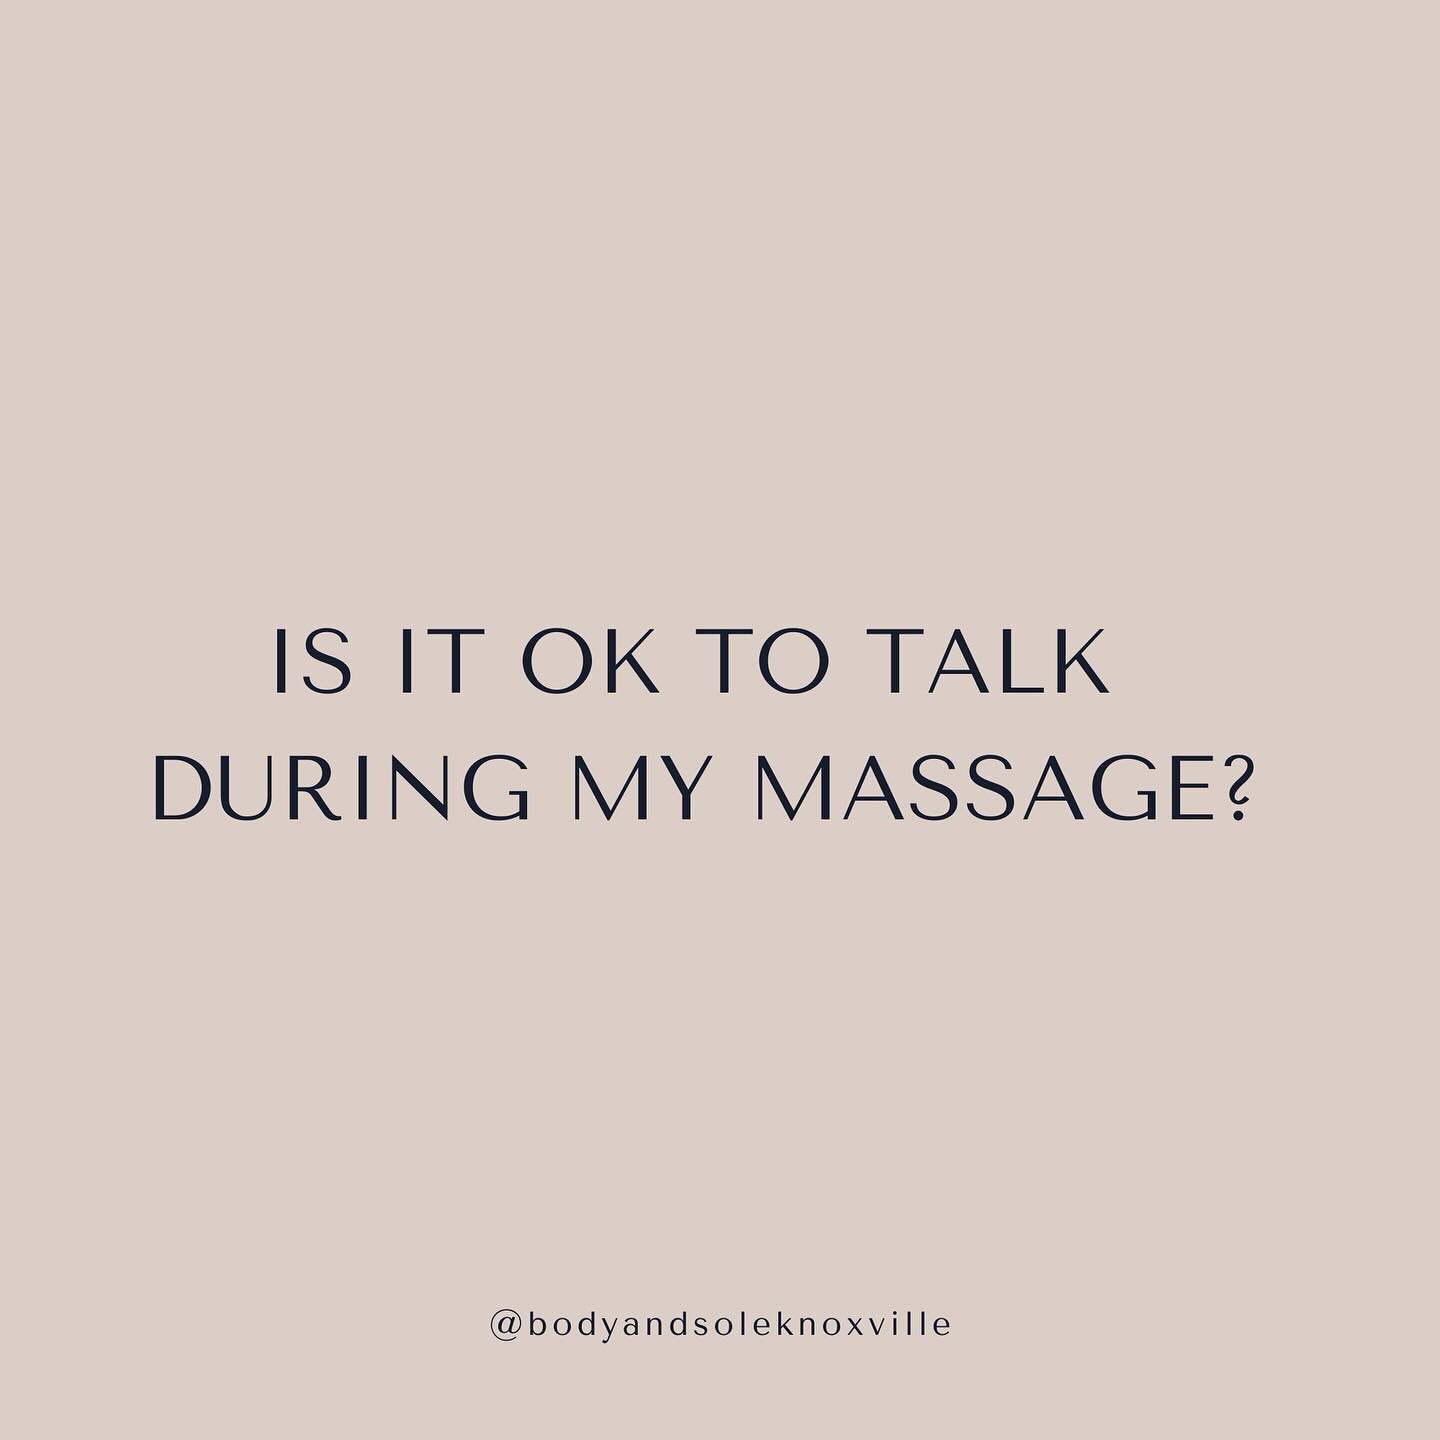 Of course! But talking is not expected - silence is also welcome and very much respected. I love a good conversation and am always happy to chat! When it comes to talking during your massage, I follow your lead: I&rsquo;ll engage if you initiate, or 